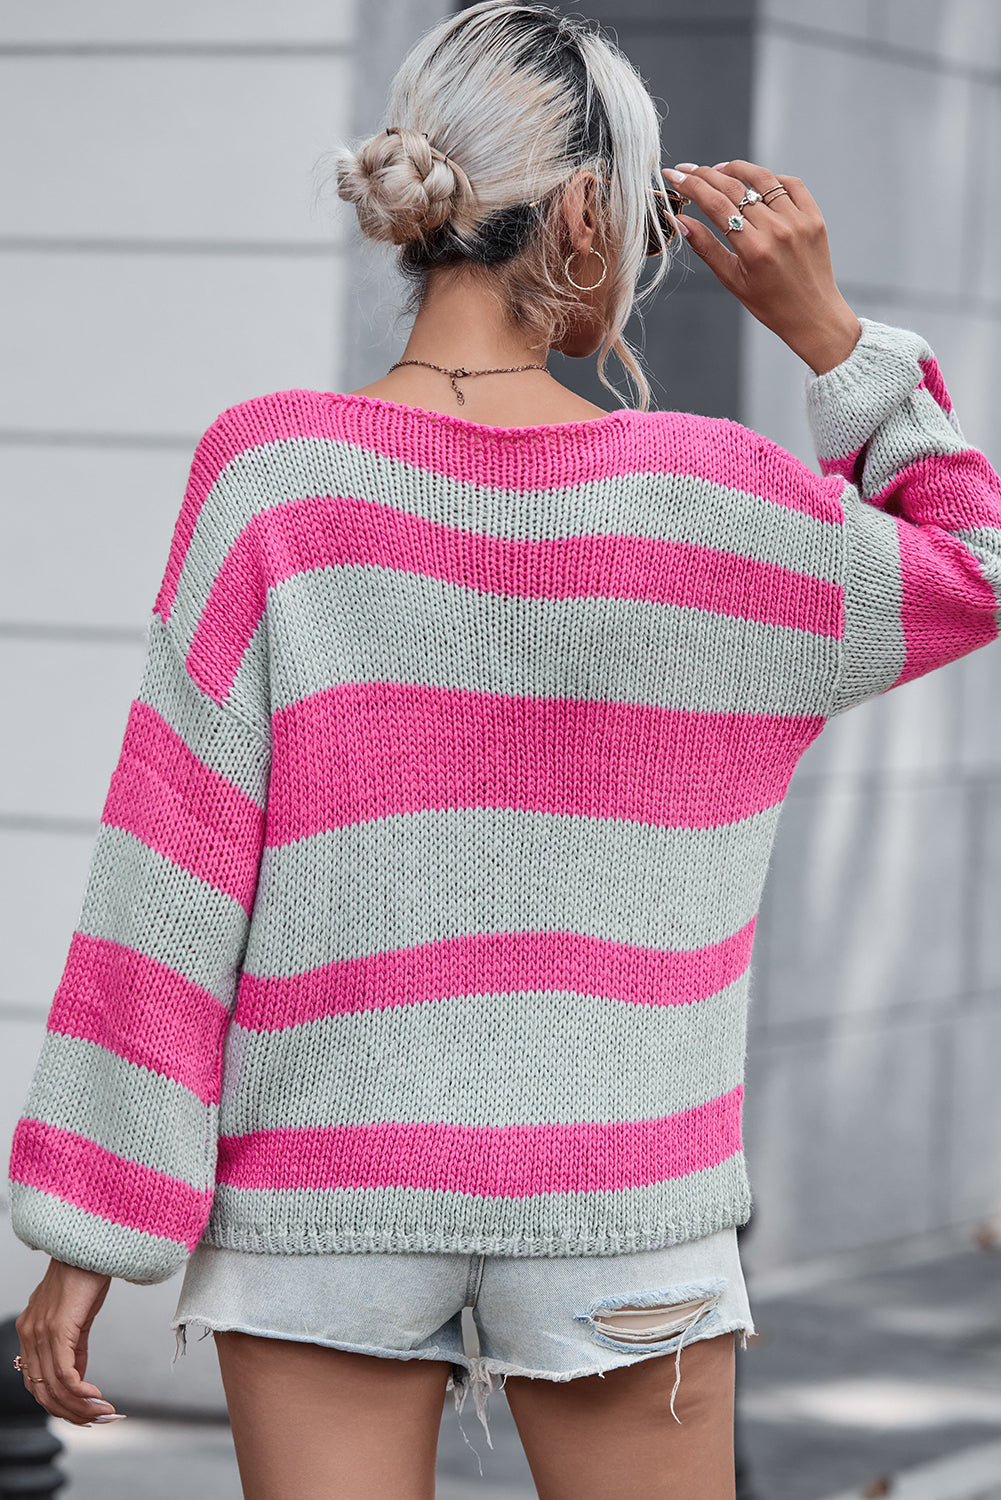 Rose Striped Colorblock Knit V Neck Loose Fit Sweater